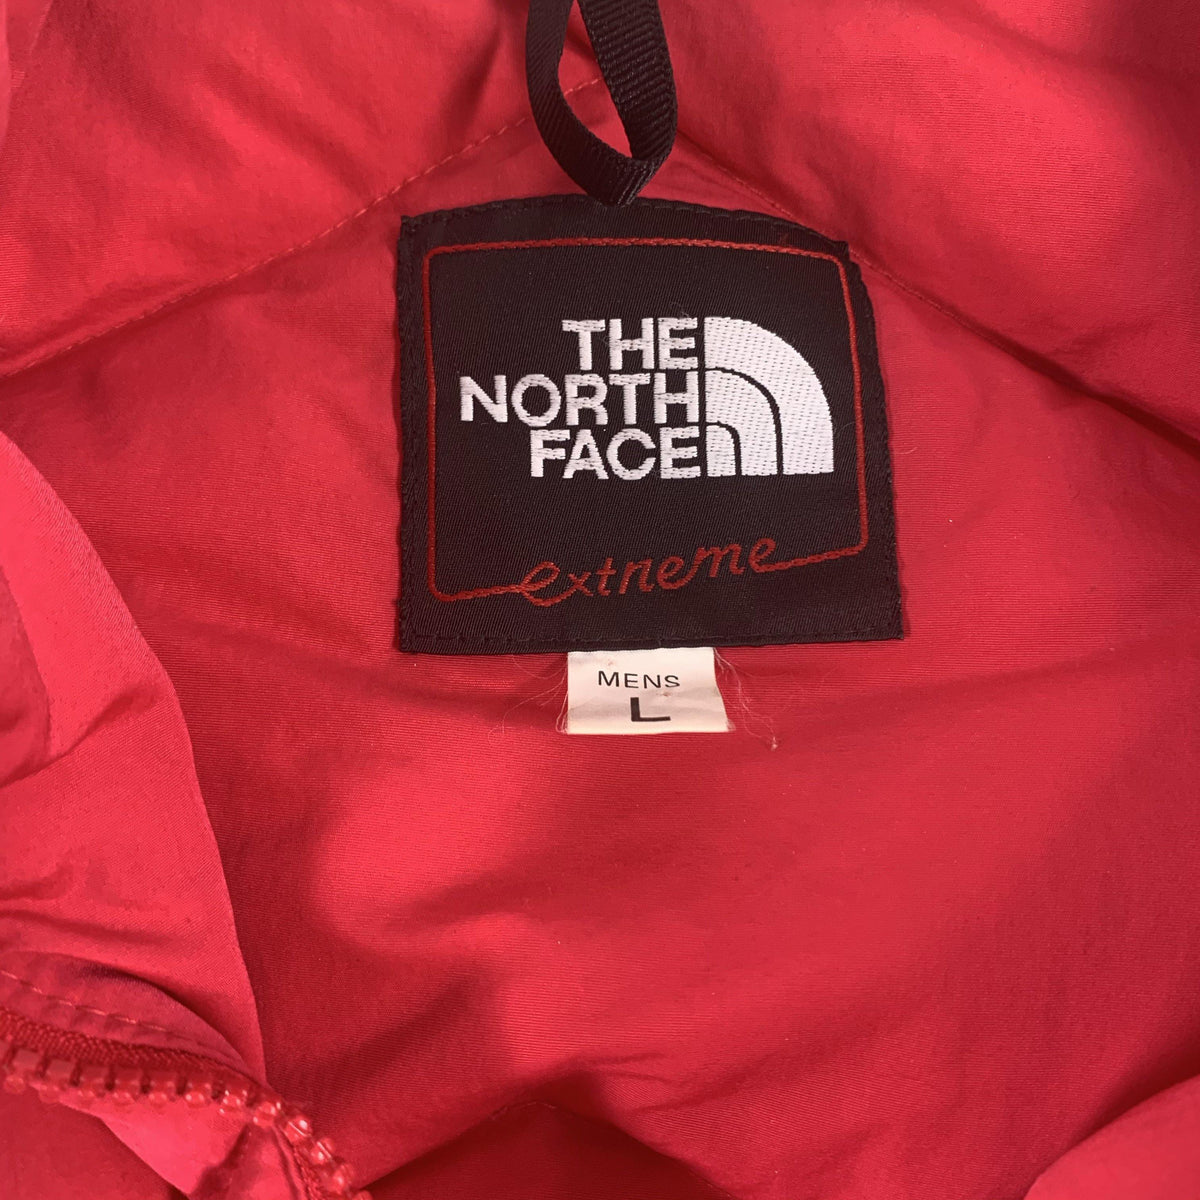 Vintage The North Face “Extreme” Down Vest - jointcustodydc